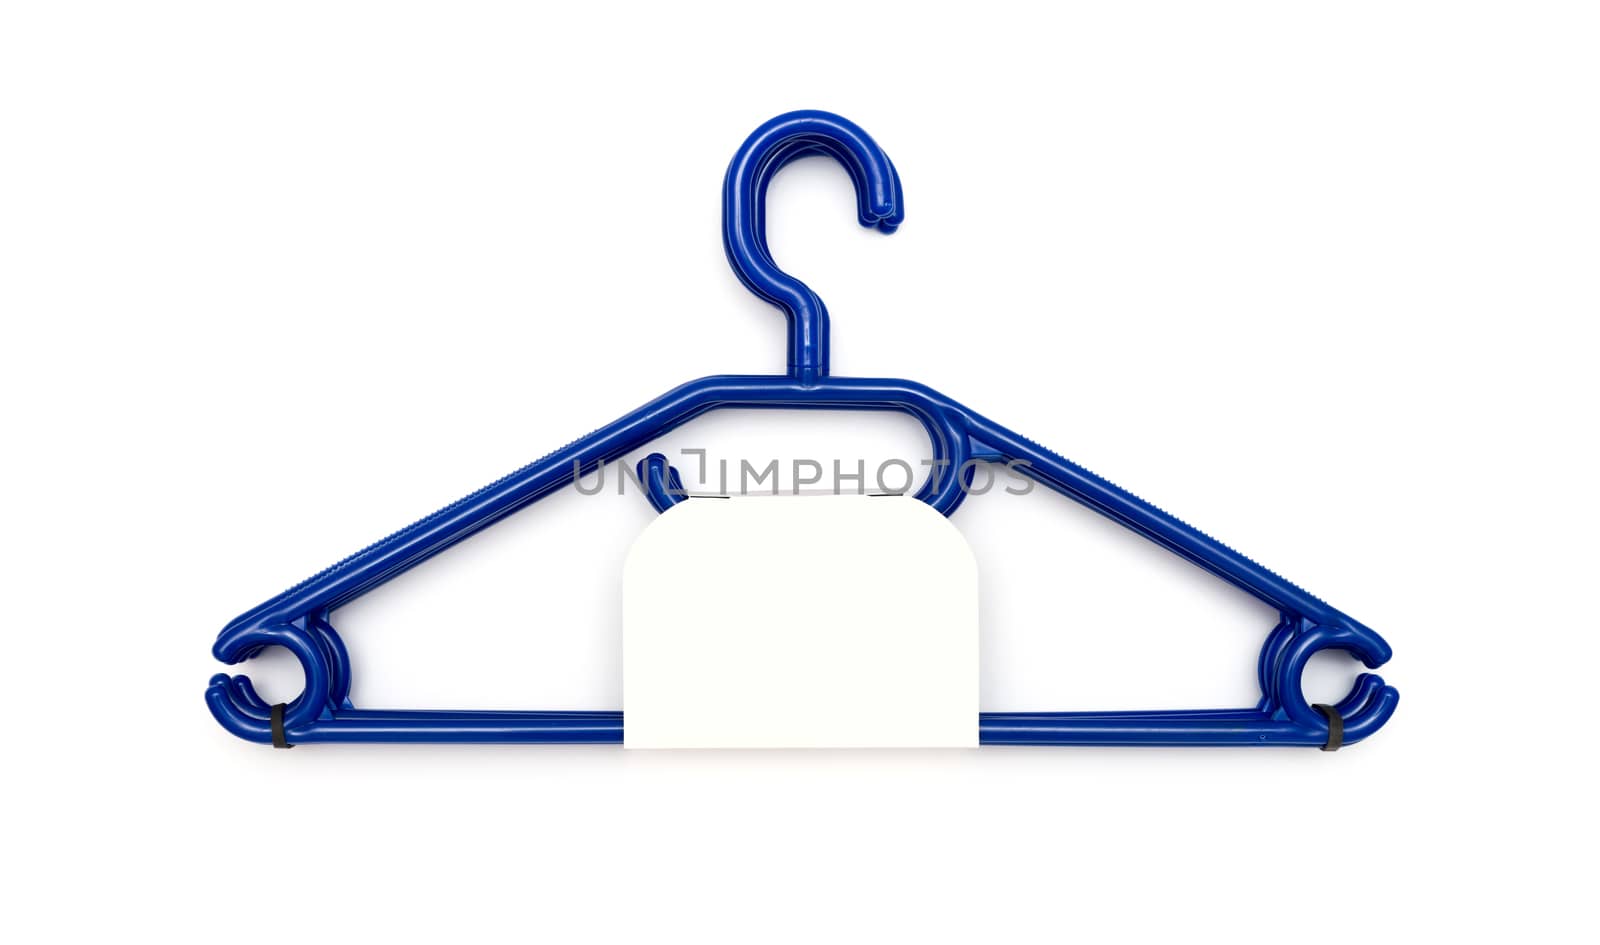 pack of new clothes hanger isolated on white background by DNKSTUDIO